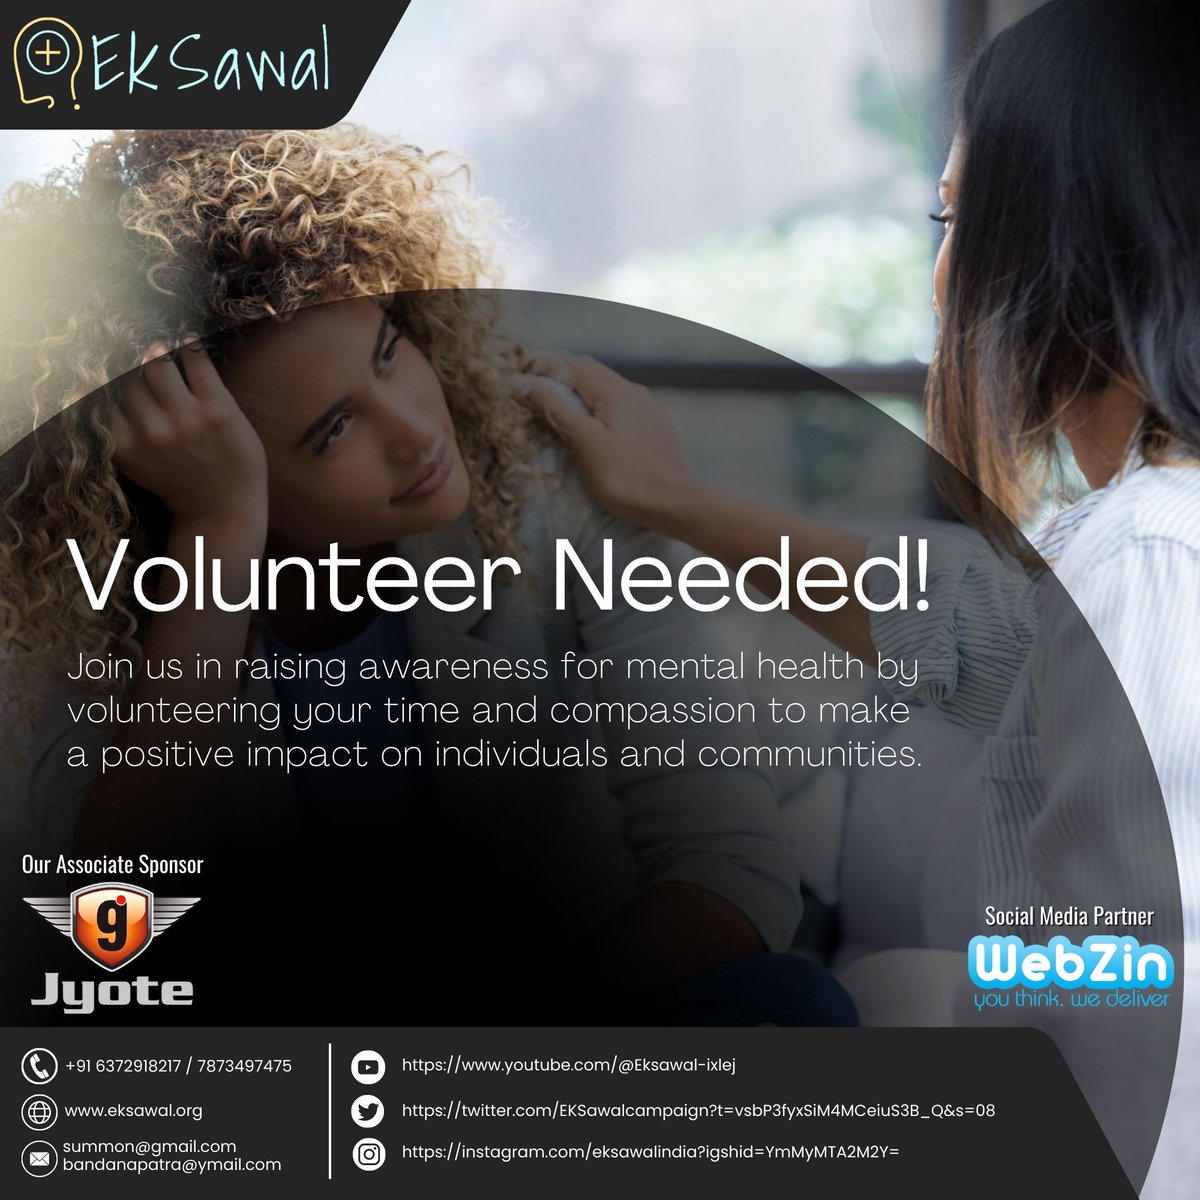 Join hands for a cause that truly matters! Ek Sawal is on a mission to spread mental health awareness. If you're passionate about making a difference, we need YOU as a volunteer.  #VolunteerRecruitment #Eksawal #endthestigma #letstalk